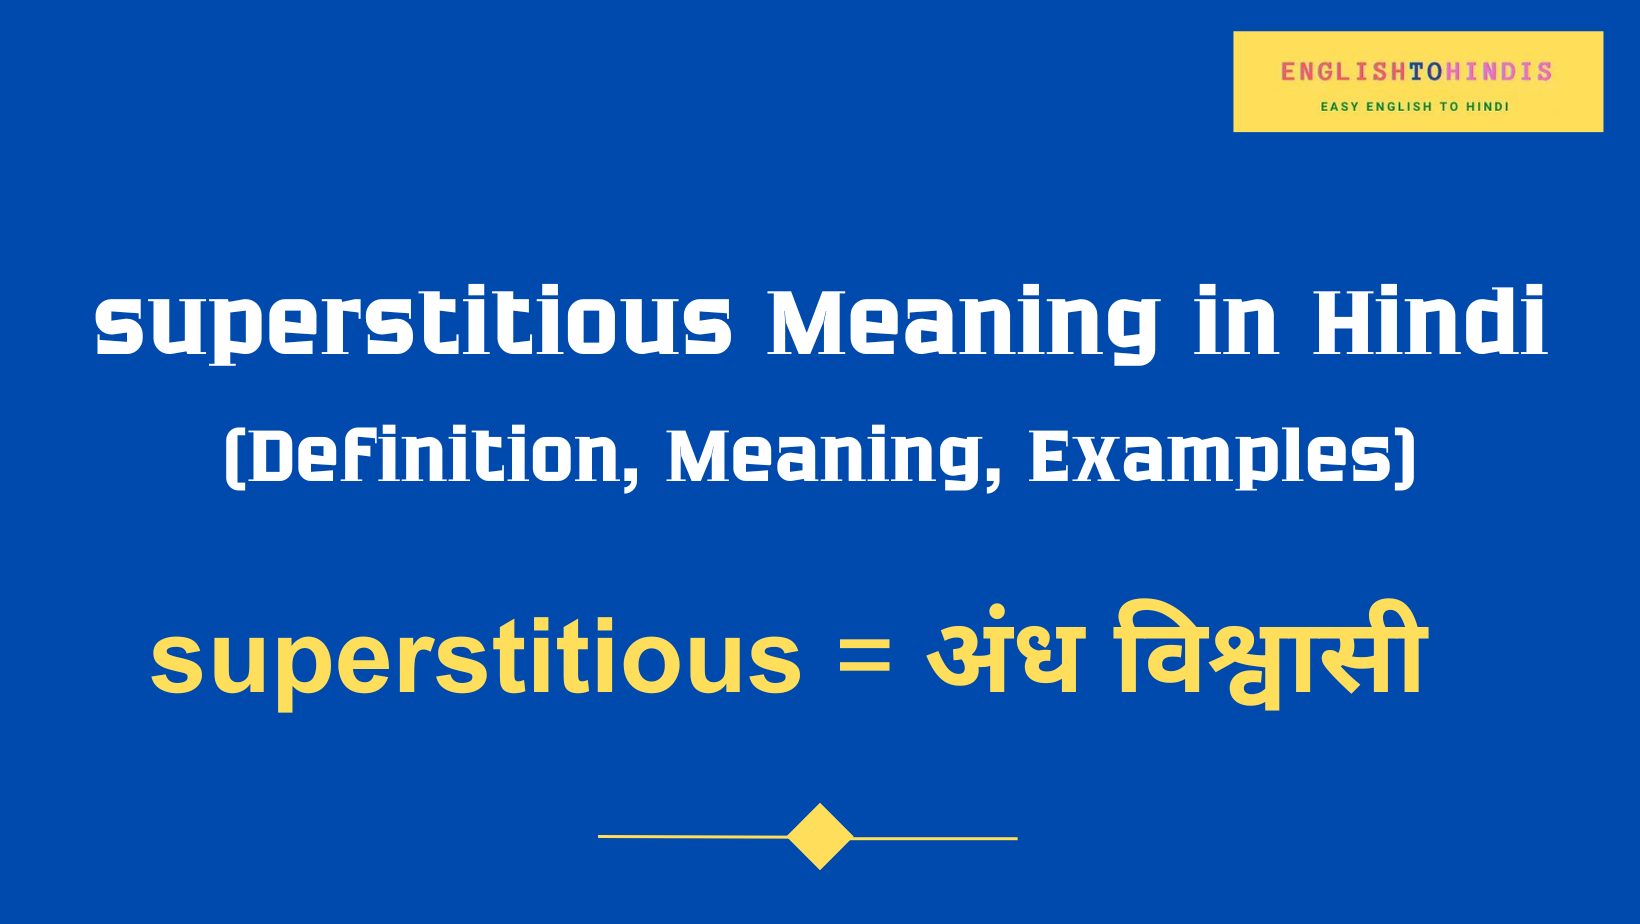 Superstitious meaning in Hindi